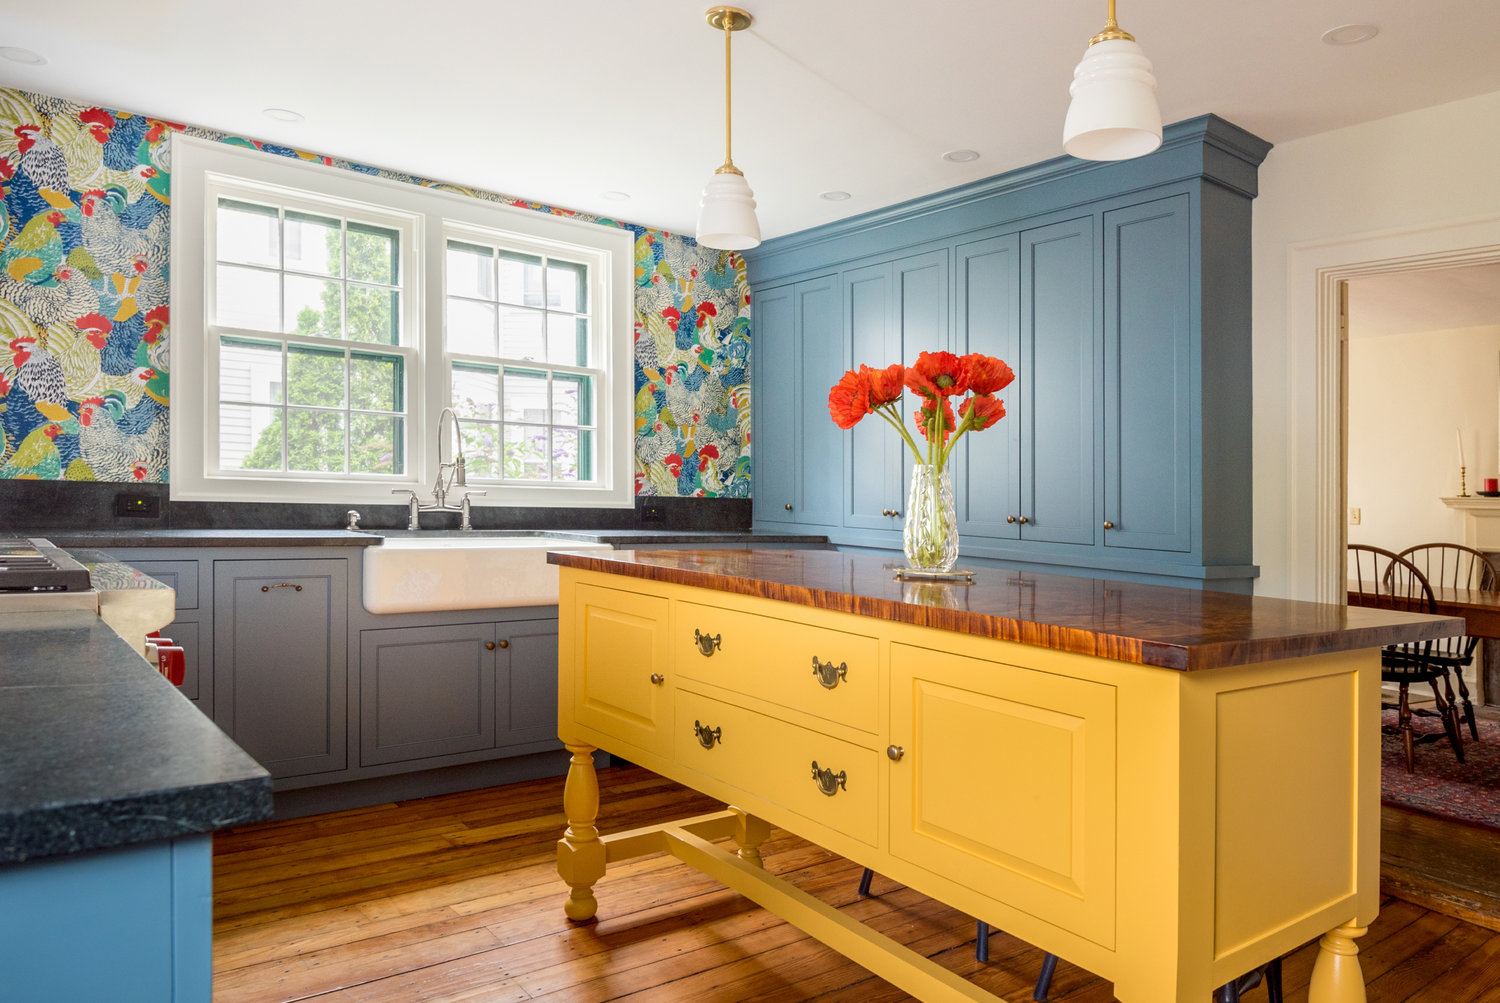 A scrap of wallpaper provides color inspiration for a kitchen update in Newport